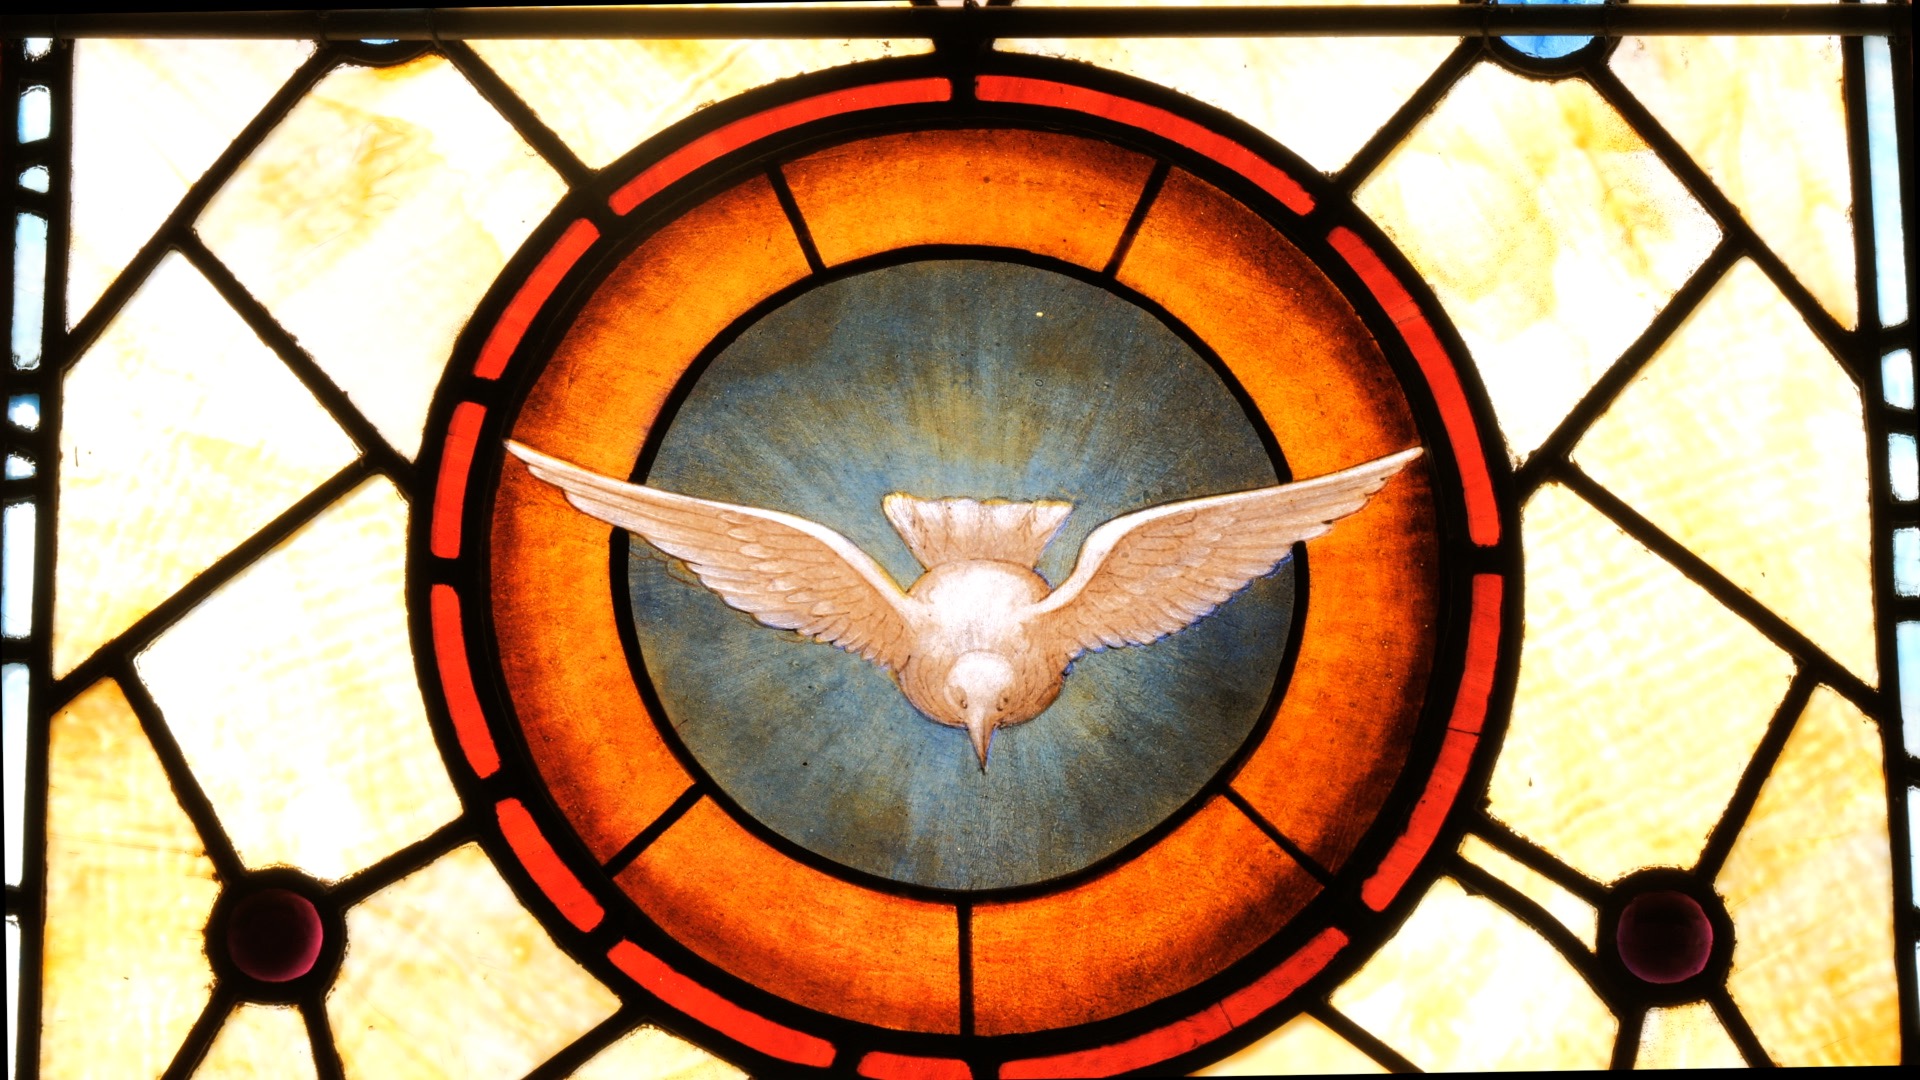 A stained glass window with an image of a bird